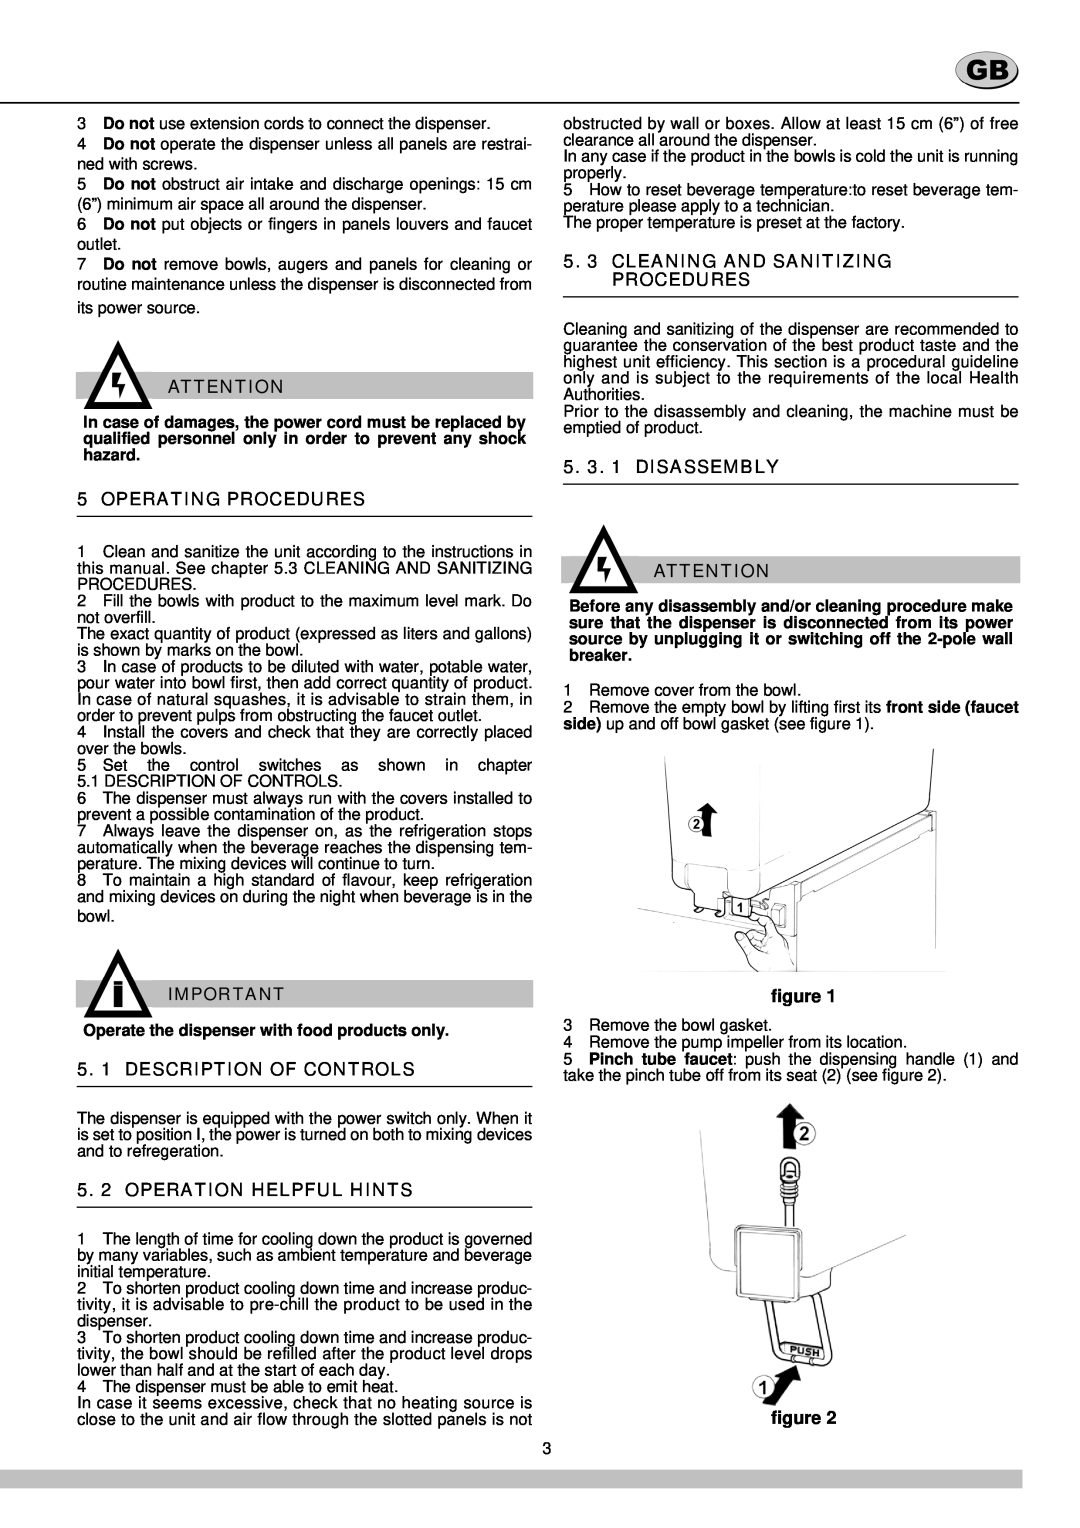 Cecilware 12-20 UL manual Operating Procedures, Cleaning And Sanitizing Procedures, 5. 3. 1 DISASSEMBLY 